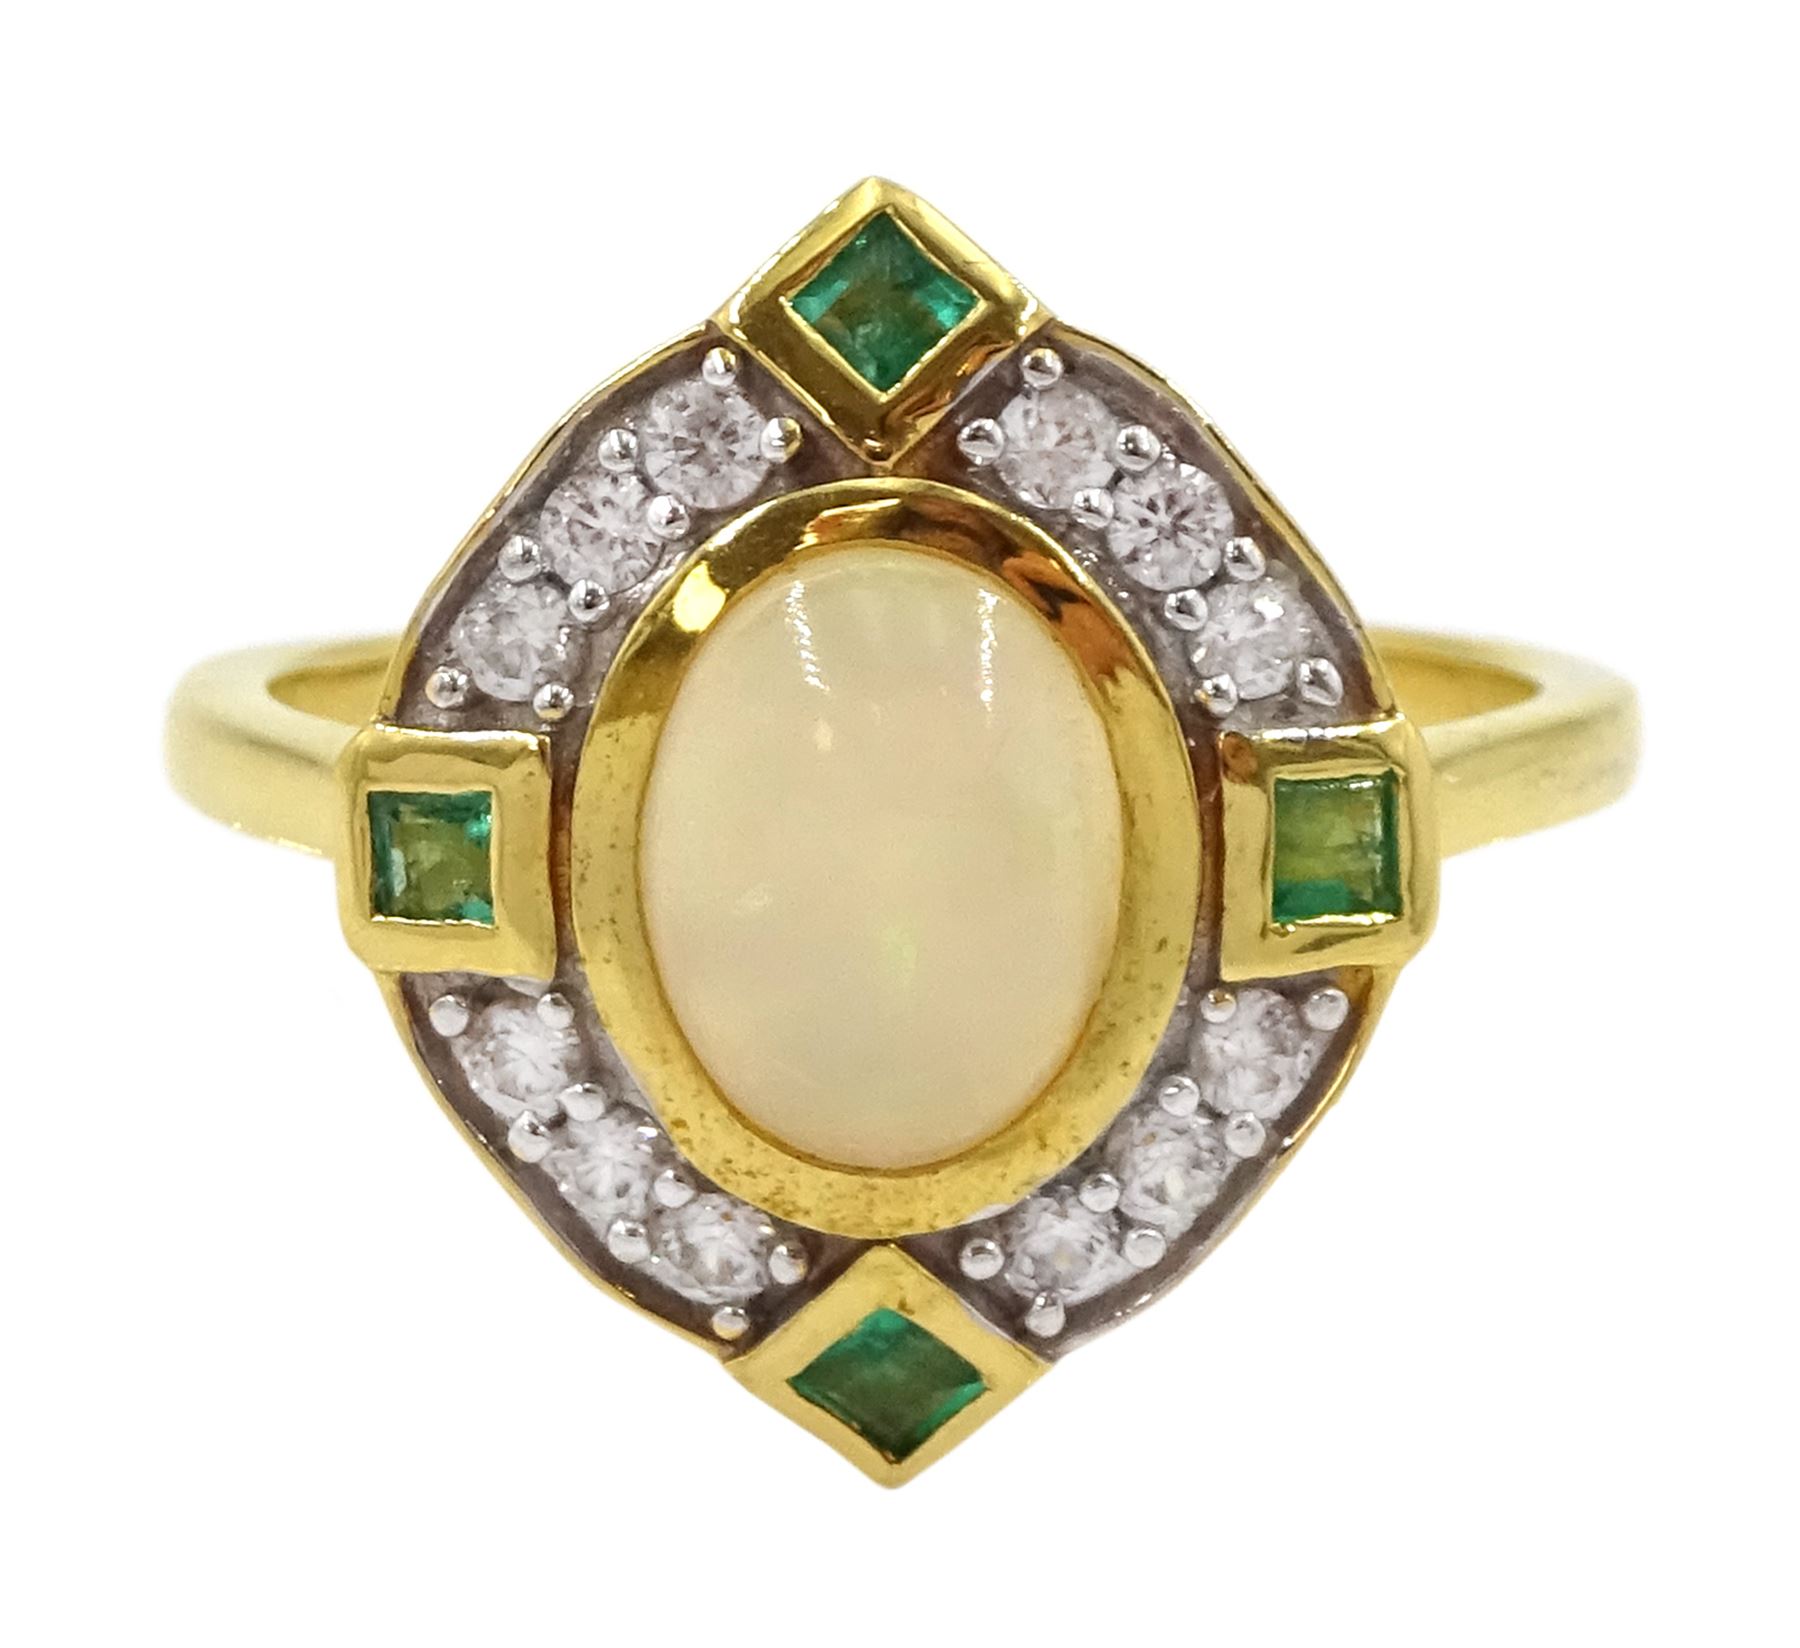 Silver-gilt opal - Image 5 of 5